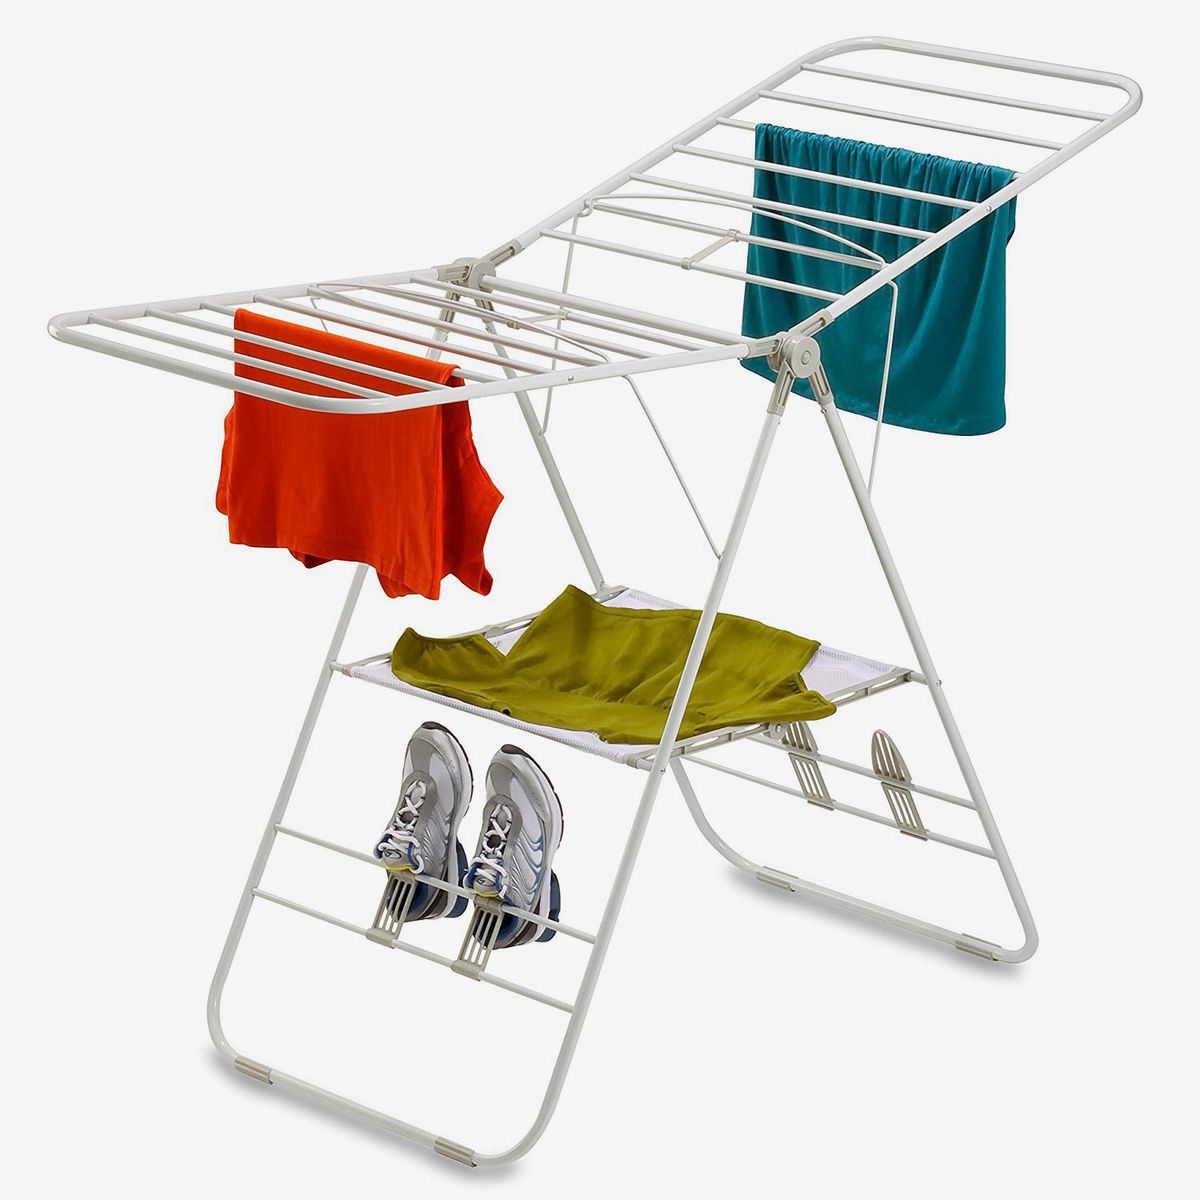 Taylor & Brown Collapsible Clothes Dryer Rack Portable Garment Racks Laundry Indoor Foldable Standing for Drying Clothes Tripod Stand Hangaway Steamer Hanger 